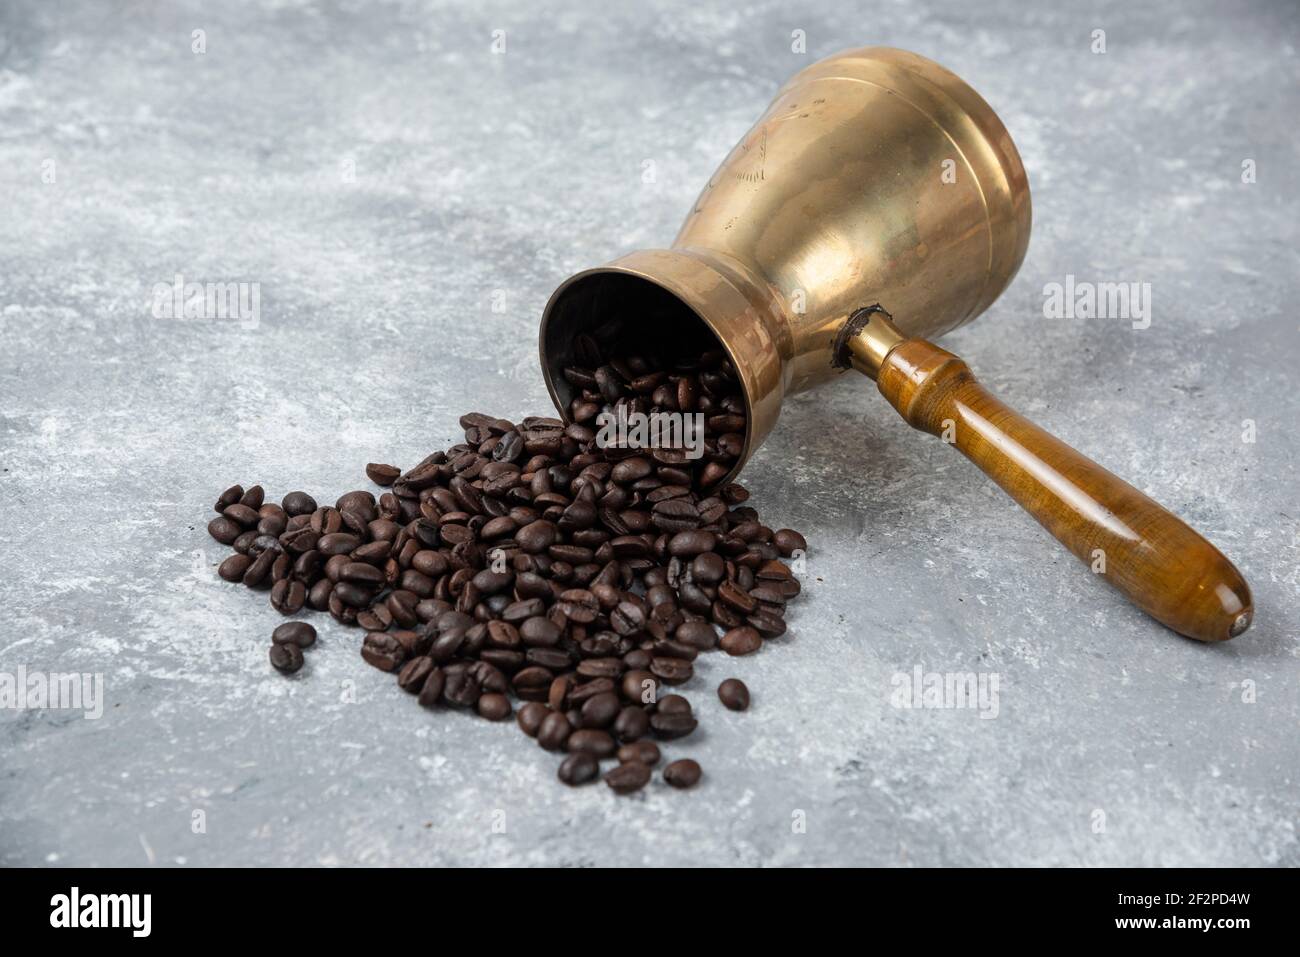 Coffee maker full of roasted coffee beans on marble surface Stock Photo